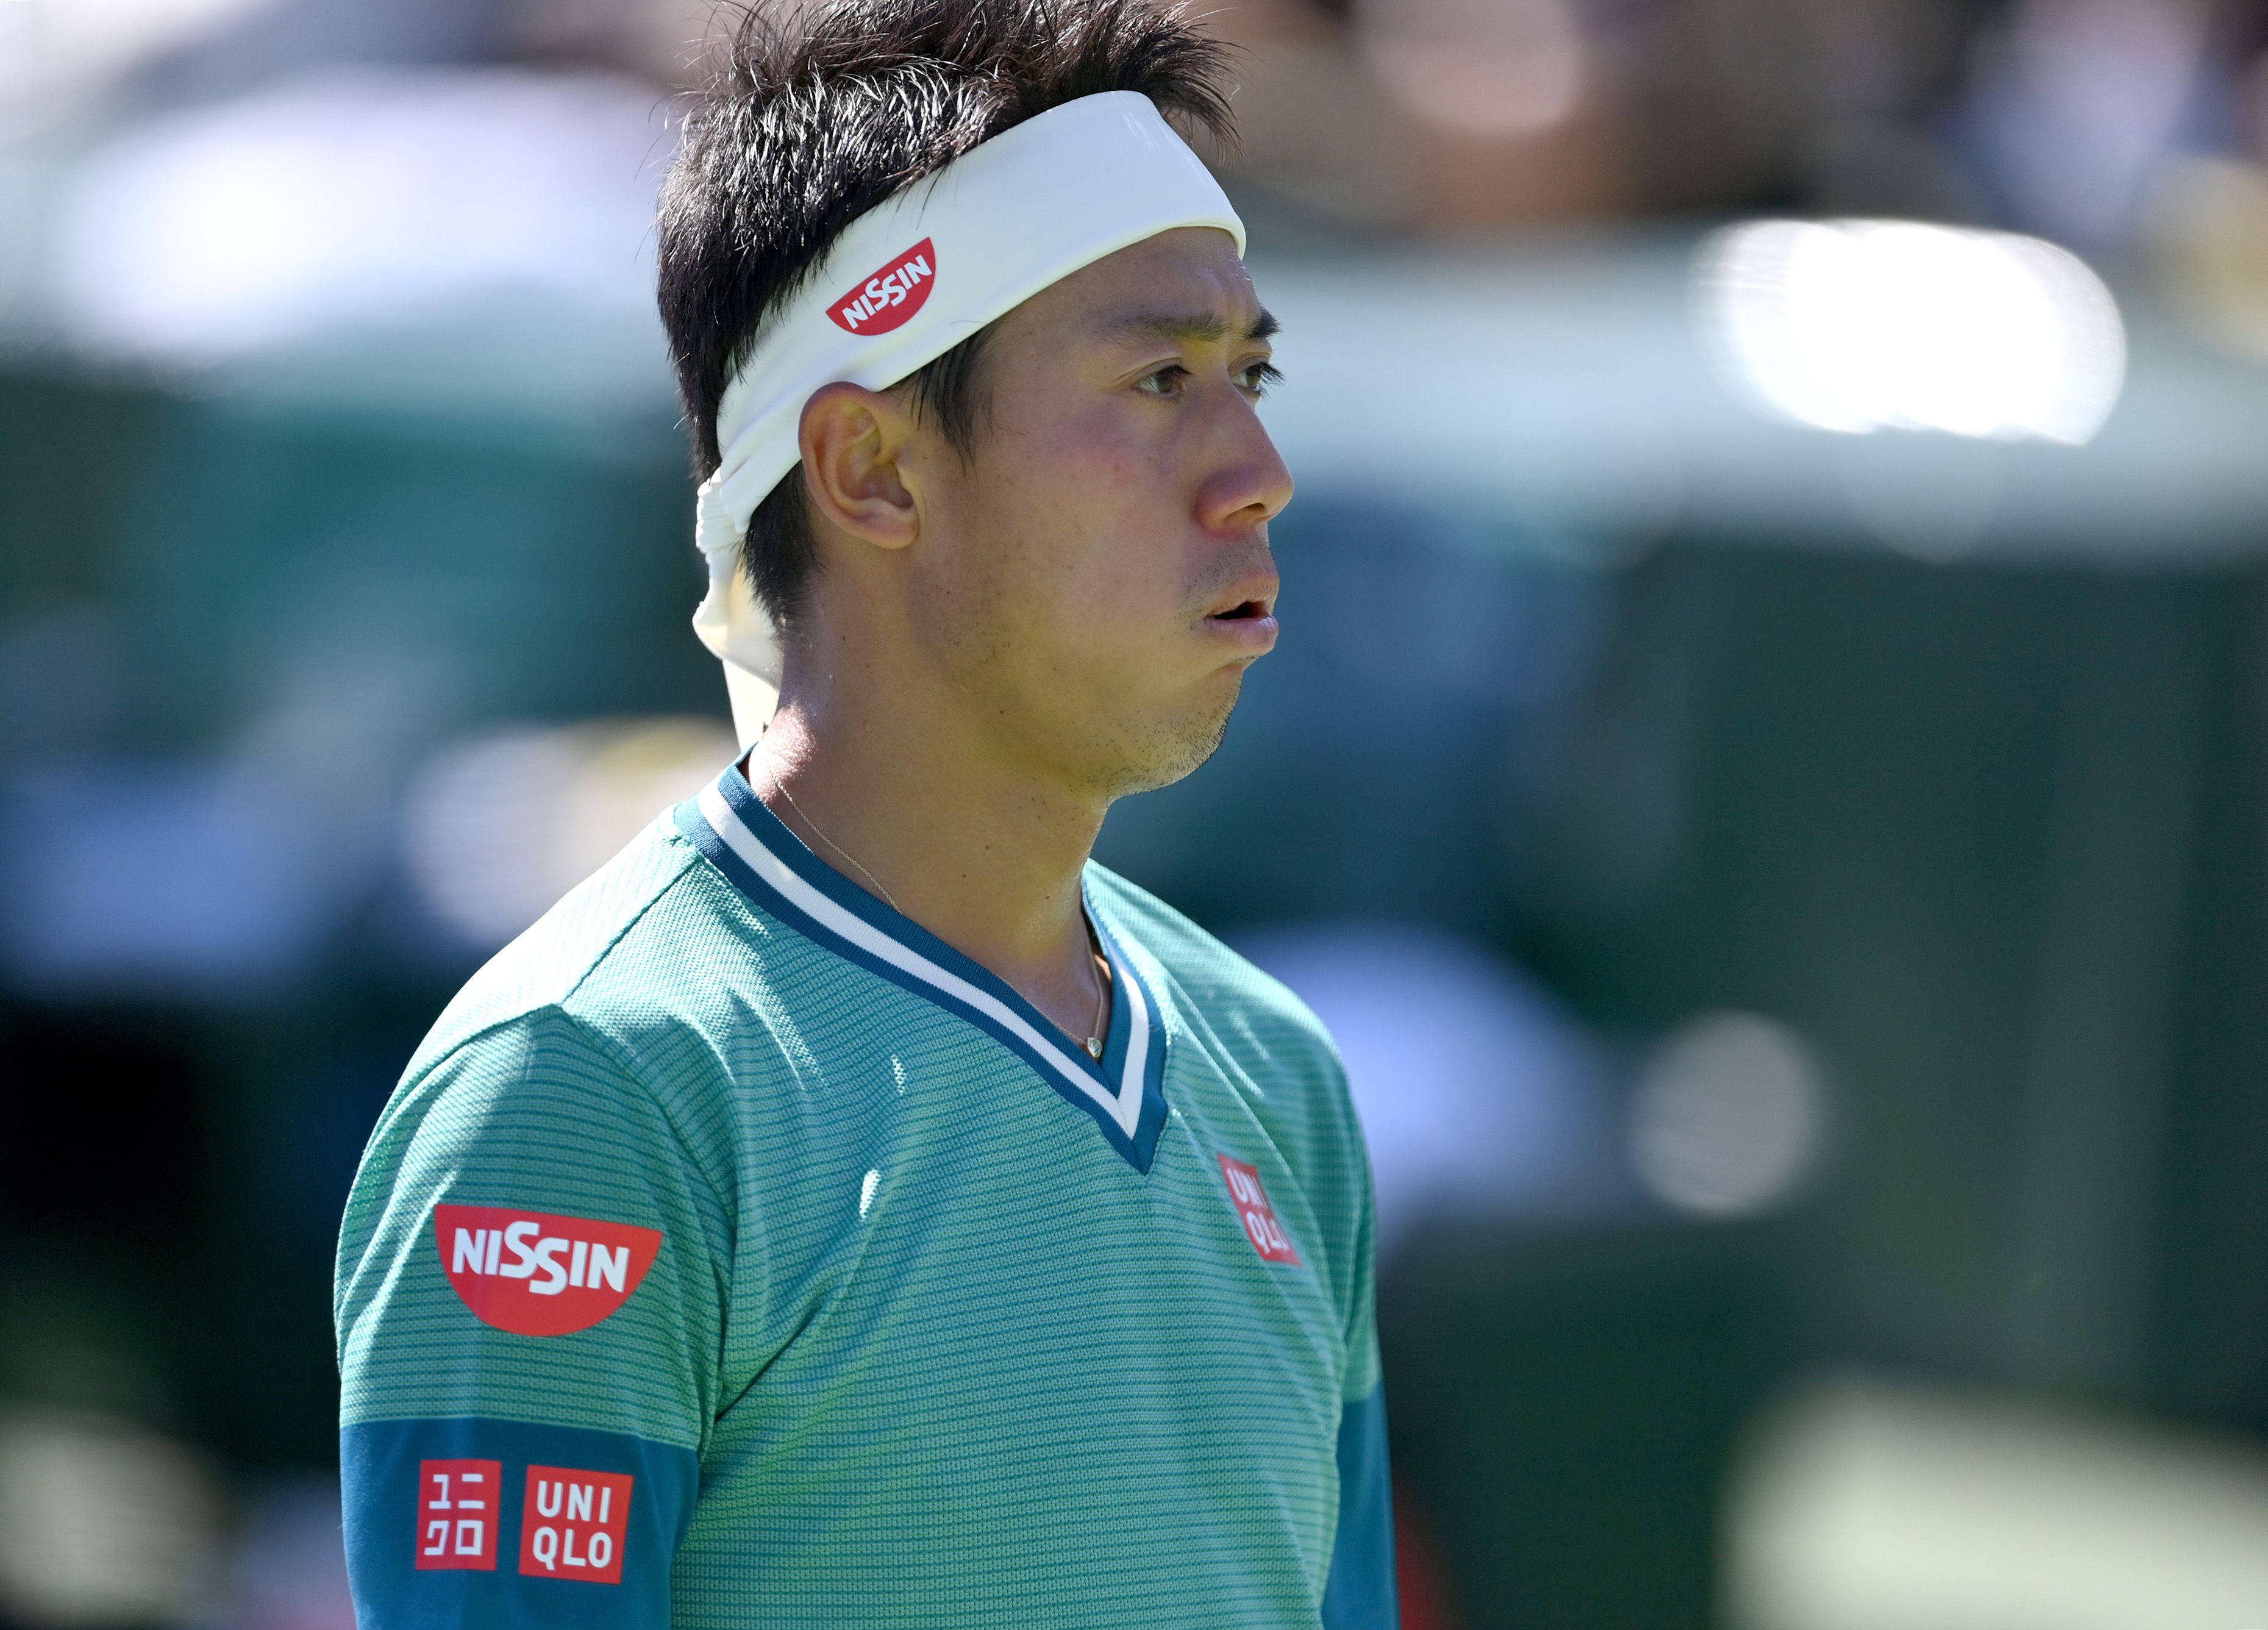 Oct 9, 2021; Indian Wells, CA, USA;  Kei Nishikori (JPN) looks on during his second round match against Daniel Evans (GER) during the BNP Paribas Open at the Indian Wells Tennis Garden. Mandatory Credit: Jayne Kamin-Oncea-USA TODAY Sports